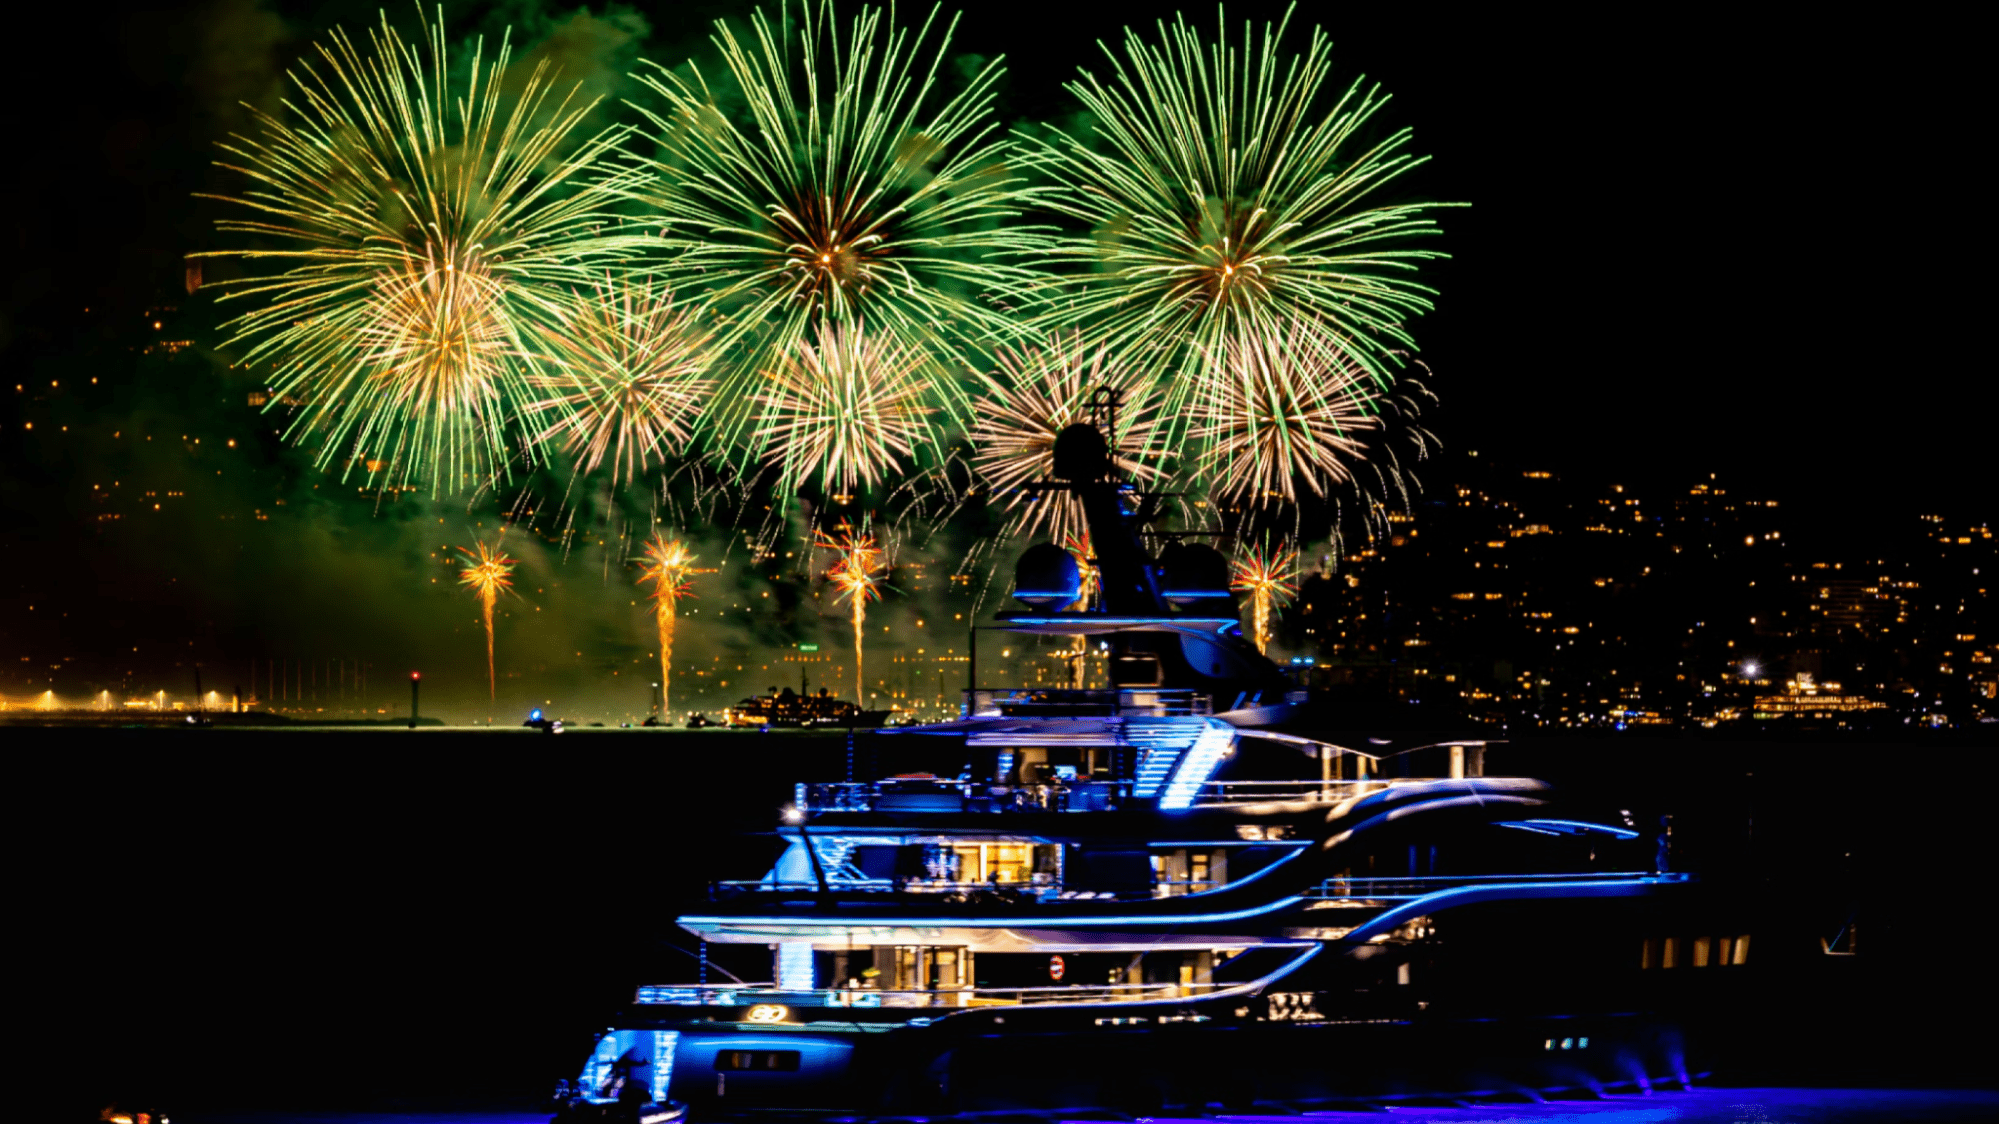 Yacht anchored in bay with fireworks in the background